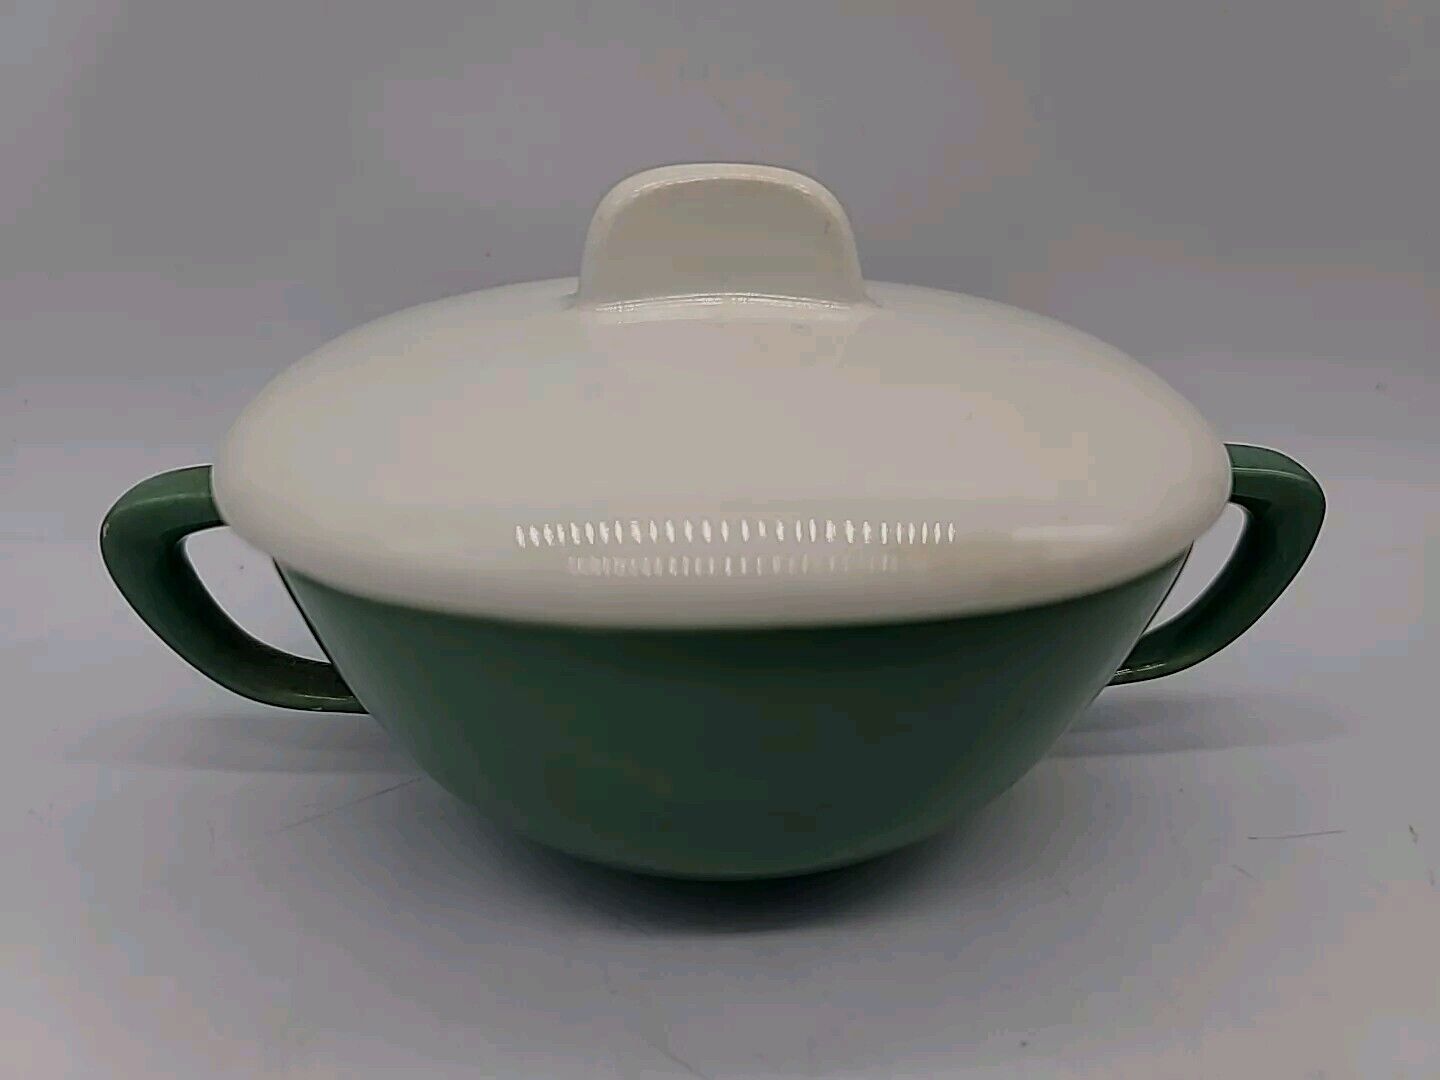 Sugar Bowl W/lid Conversation Green by TAYLOR SMITH & TAYLOR Lid 1954 MINT